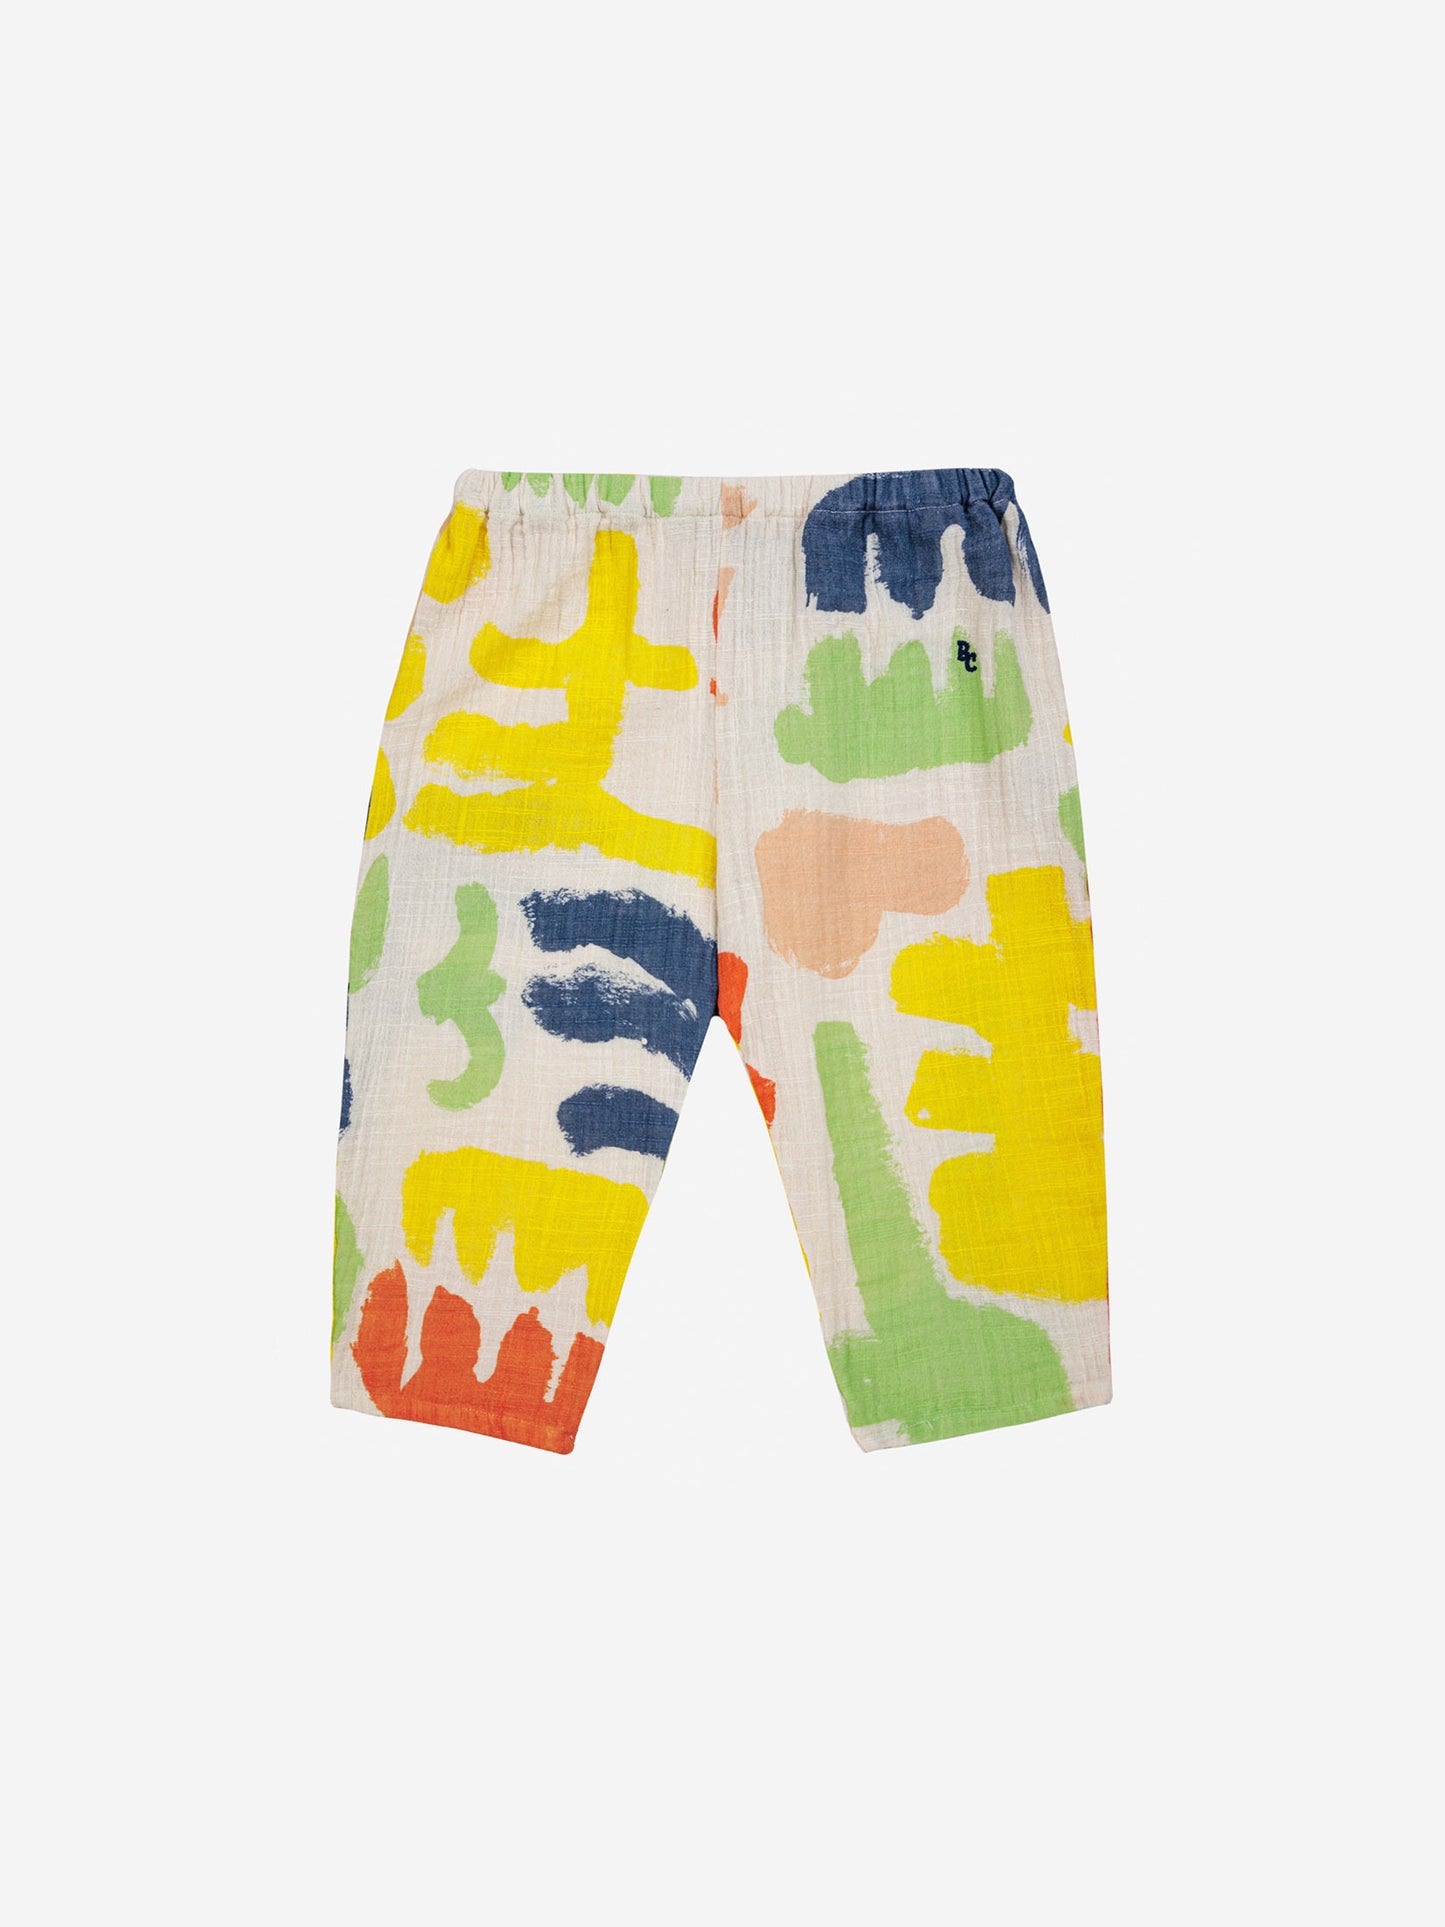 Carnival all over woven pants